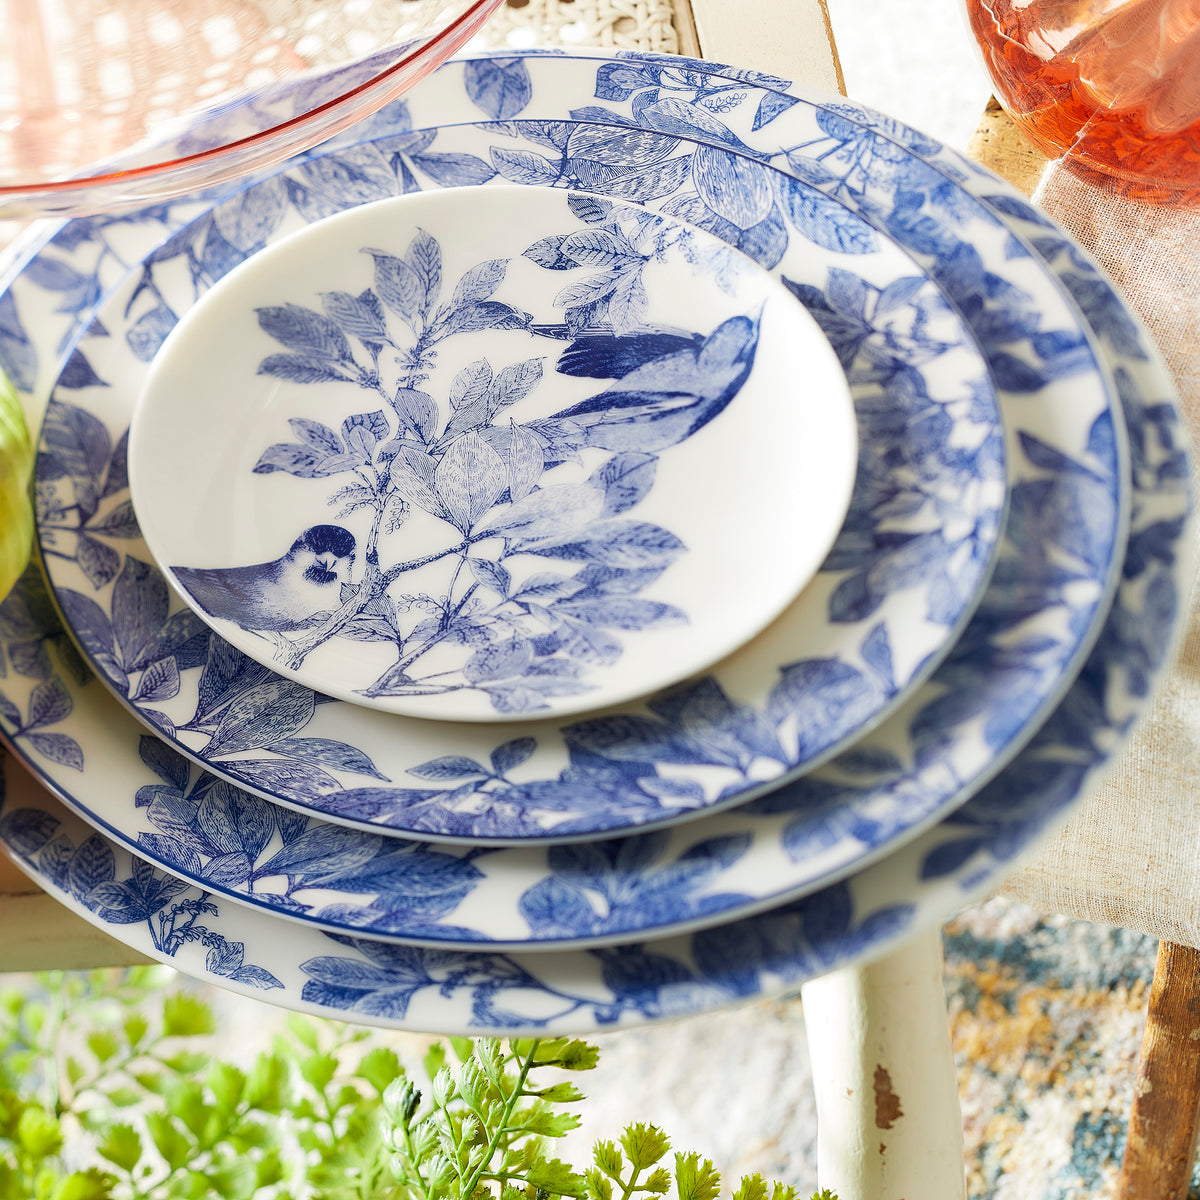 A set of Arbor Blue Birds Canapé Plates by Caskata Artisanal Home porcelain dinnerware with blue and white plates on a table.